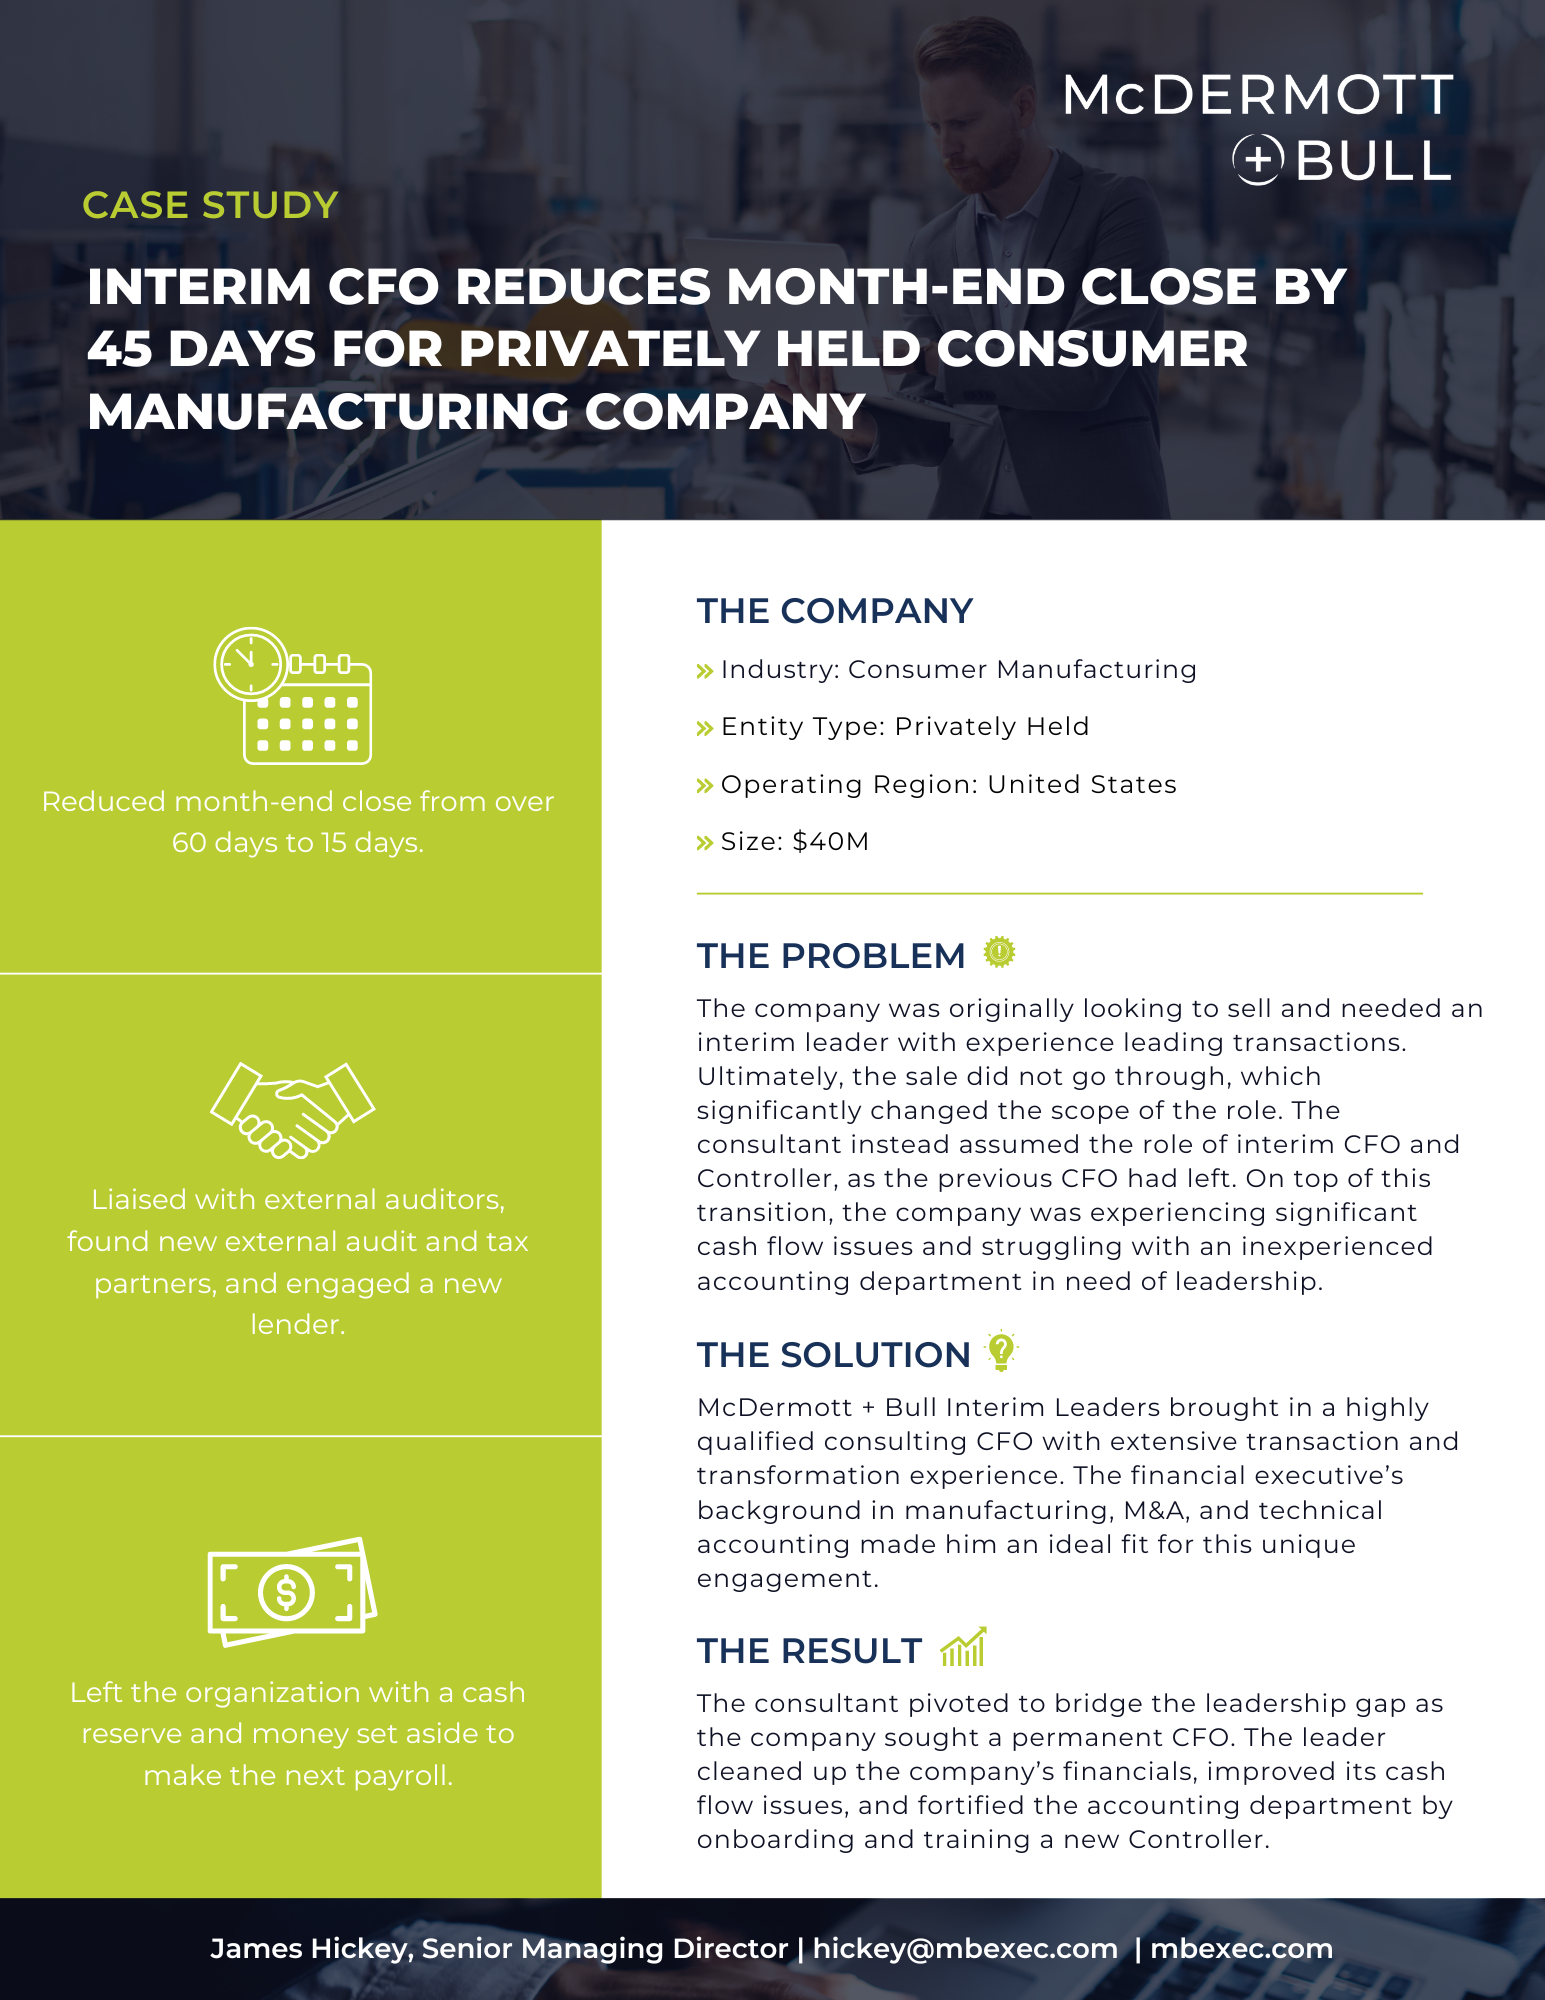 INTERIM CFO REDUCES MONTH-END CLOSE BY 45 DAYS FOR PRIVATELY HELD CONSUMER MANUFACTURING COMPANY